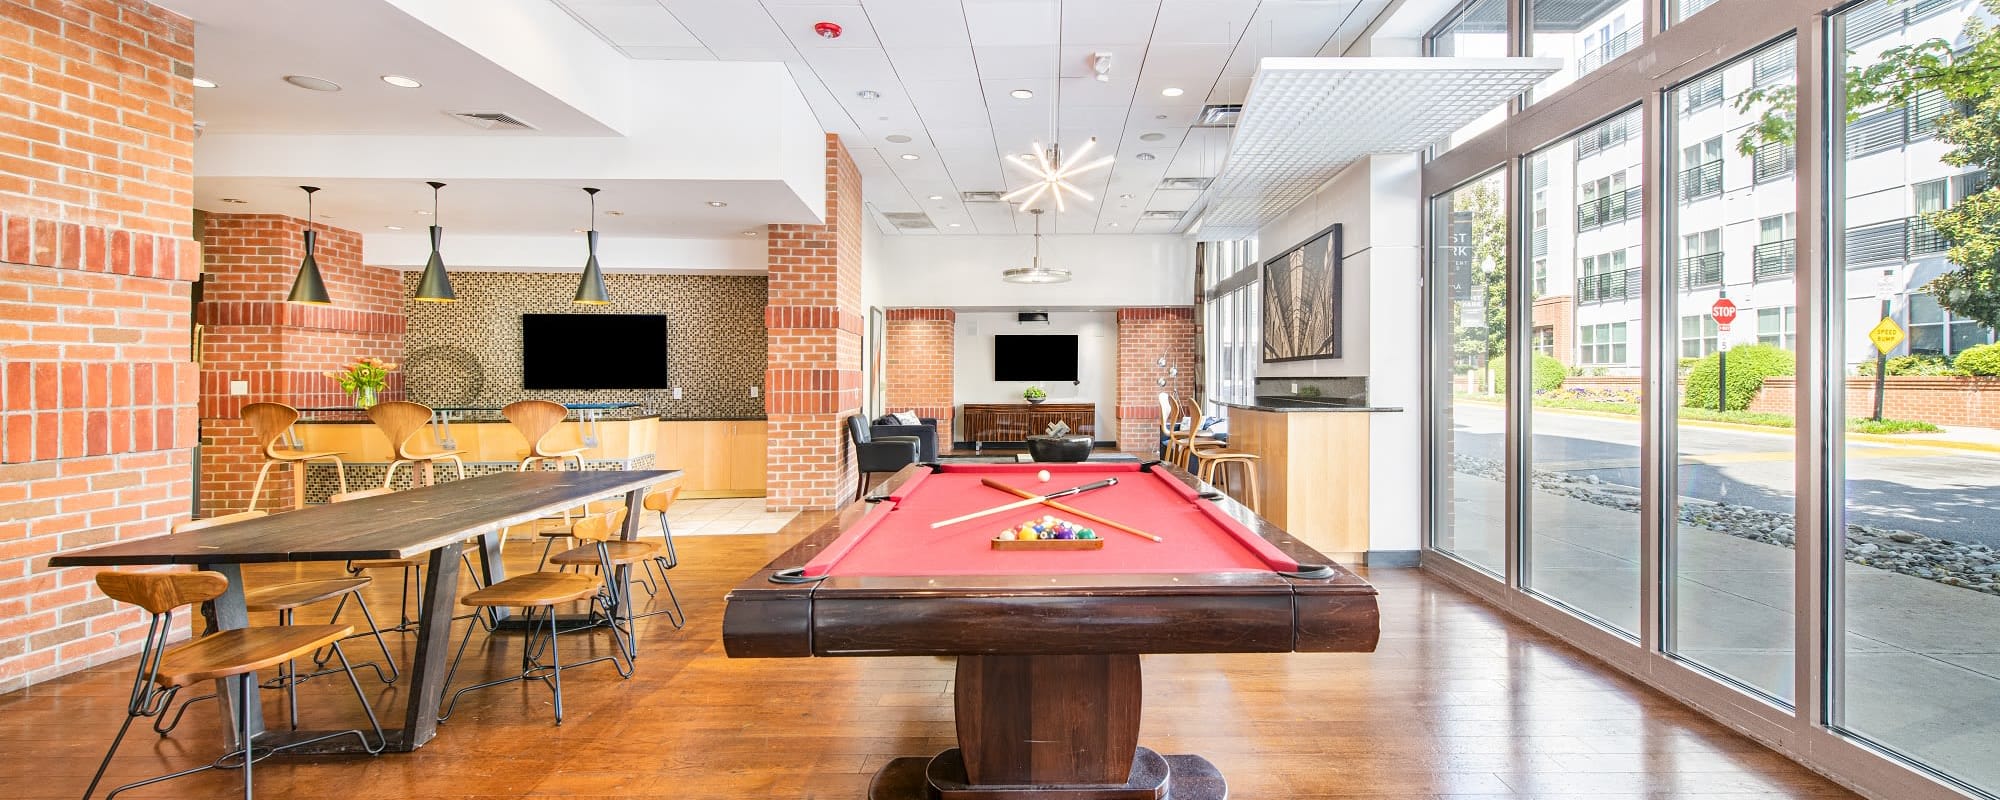 A billiards table in the community clubhouse at Mode at Hyattsville in Hyattsville, Maryland